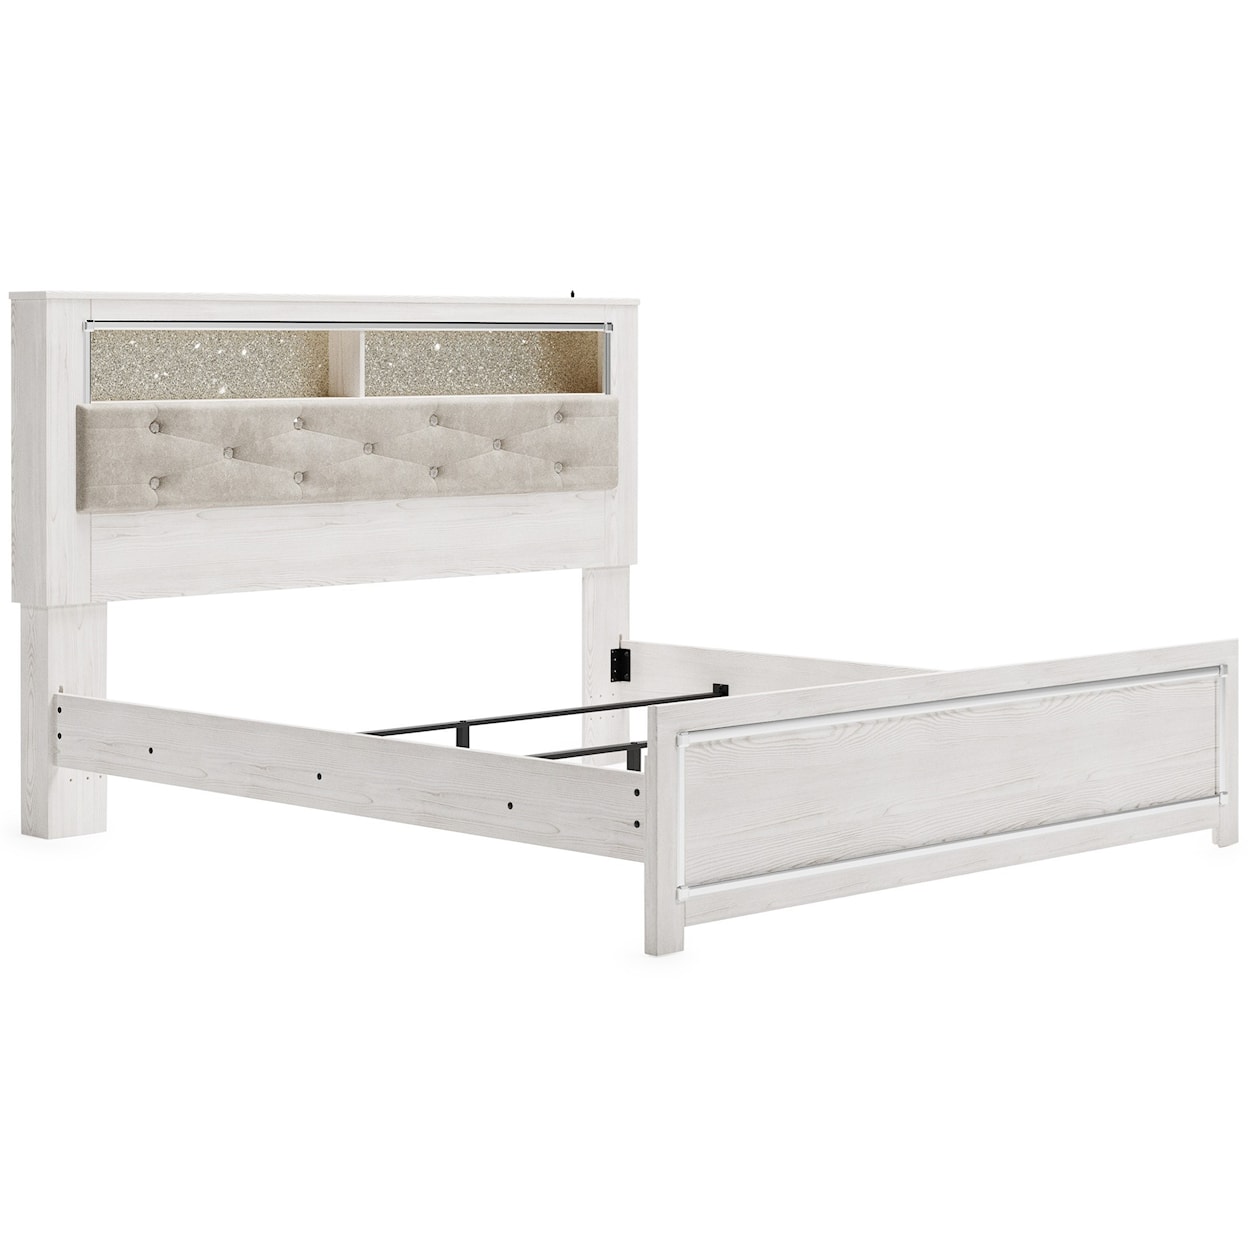 Benchcraft Altyra King Upholstered Bookcase Bed